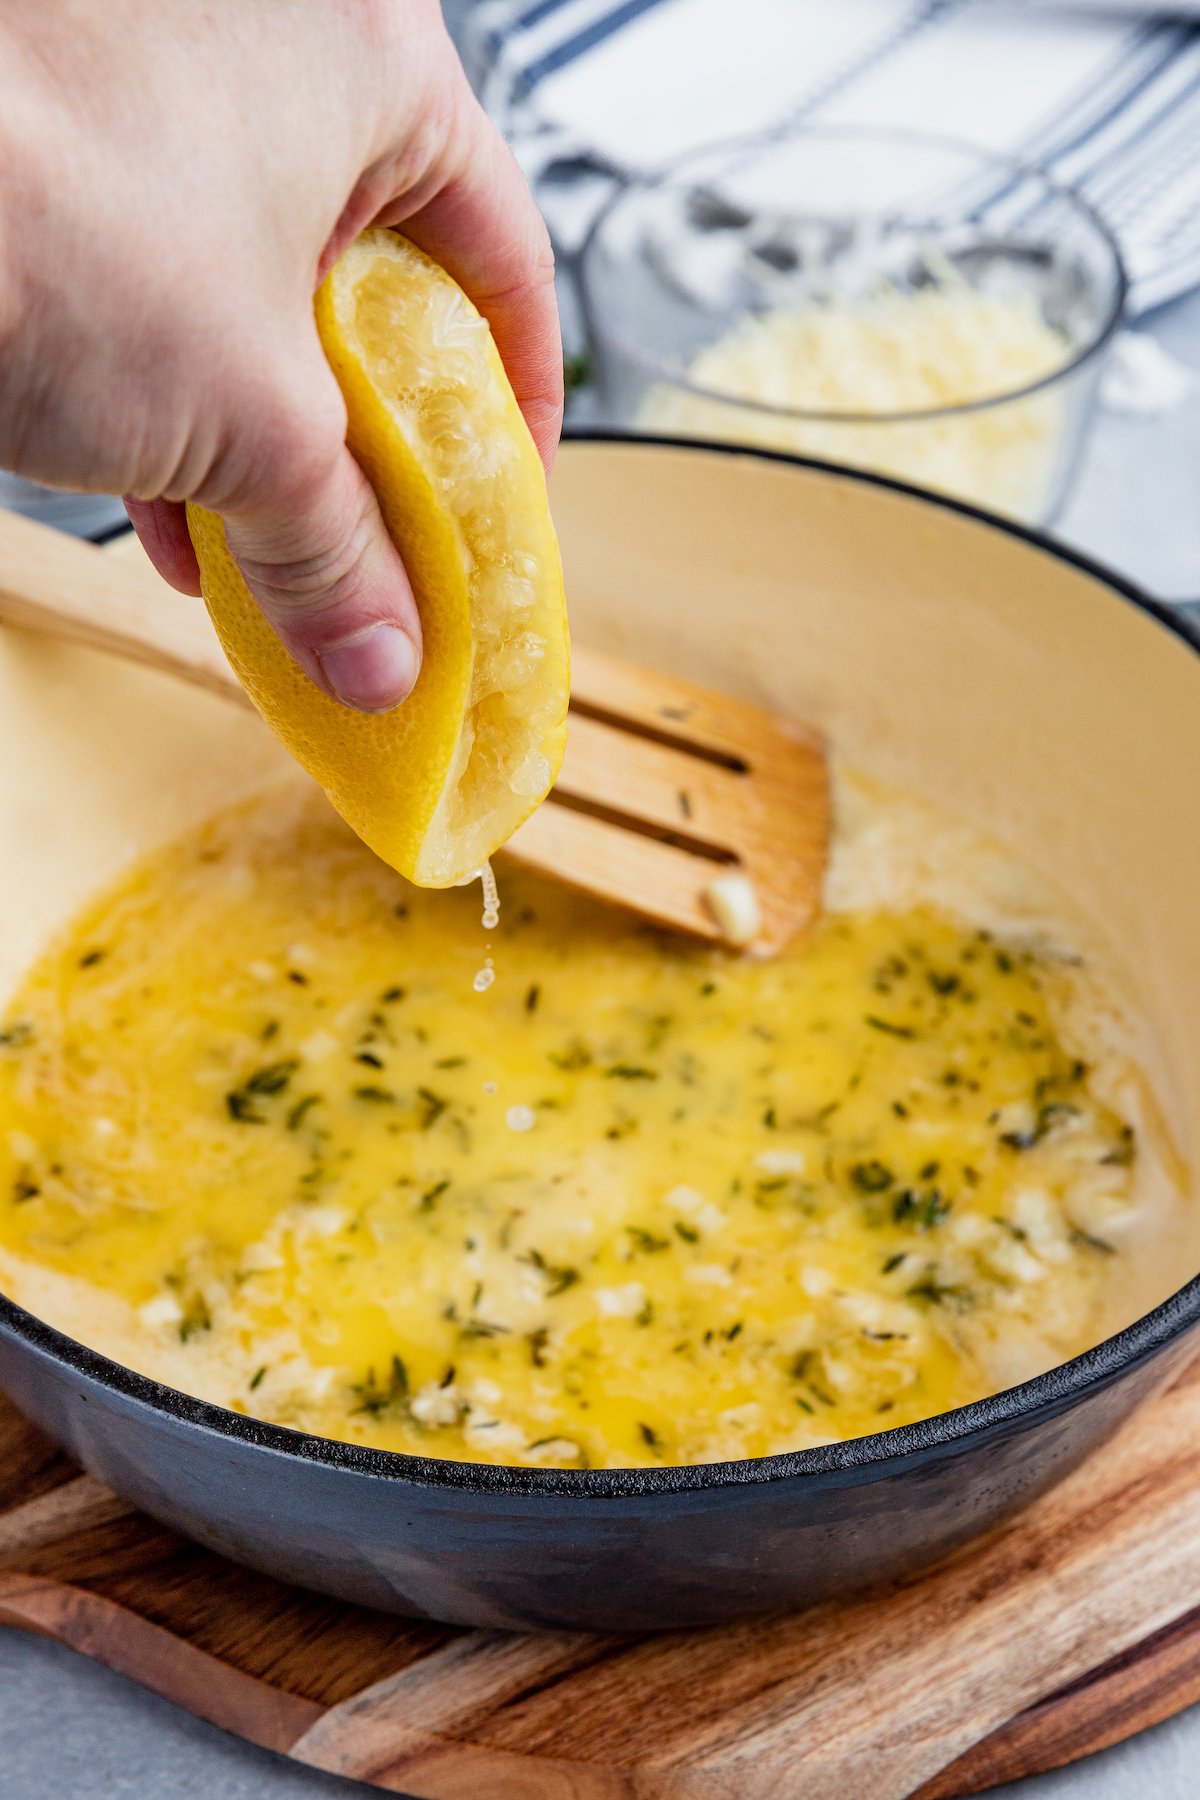 A hand squeezes the juice from half a lemon into a pan with melted butter and thyme.